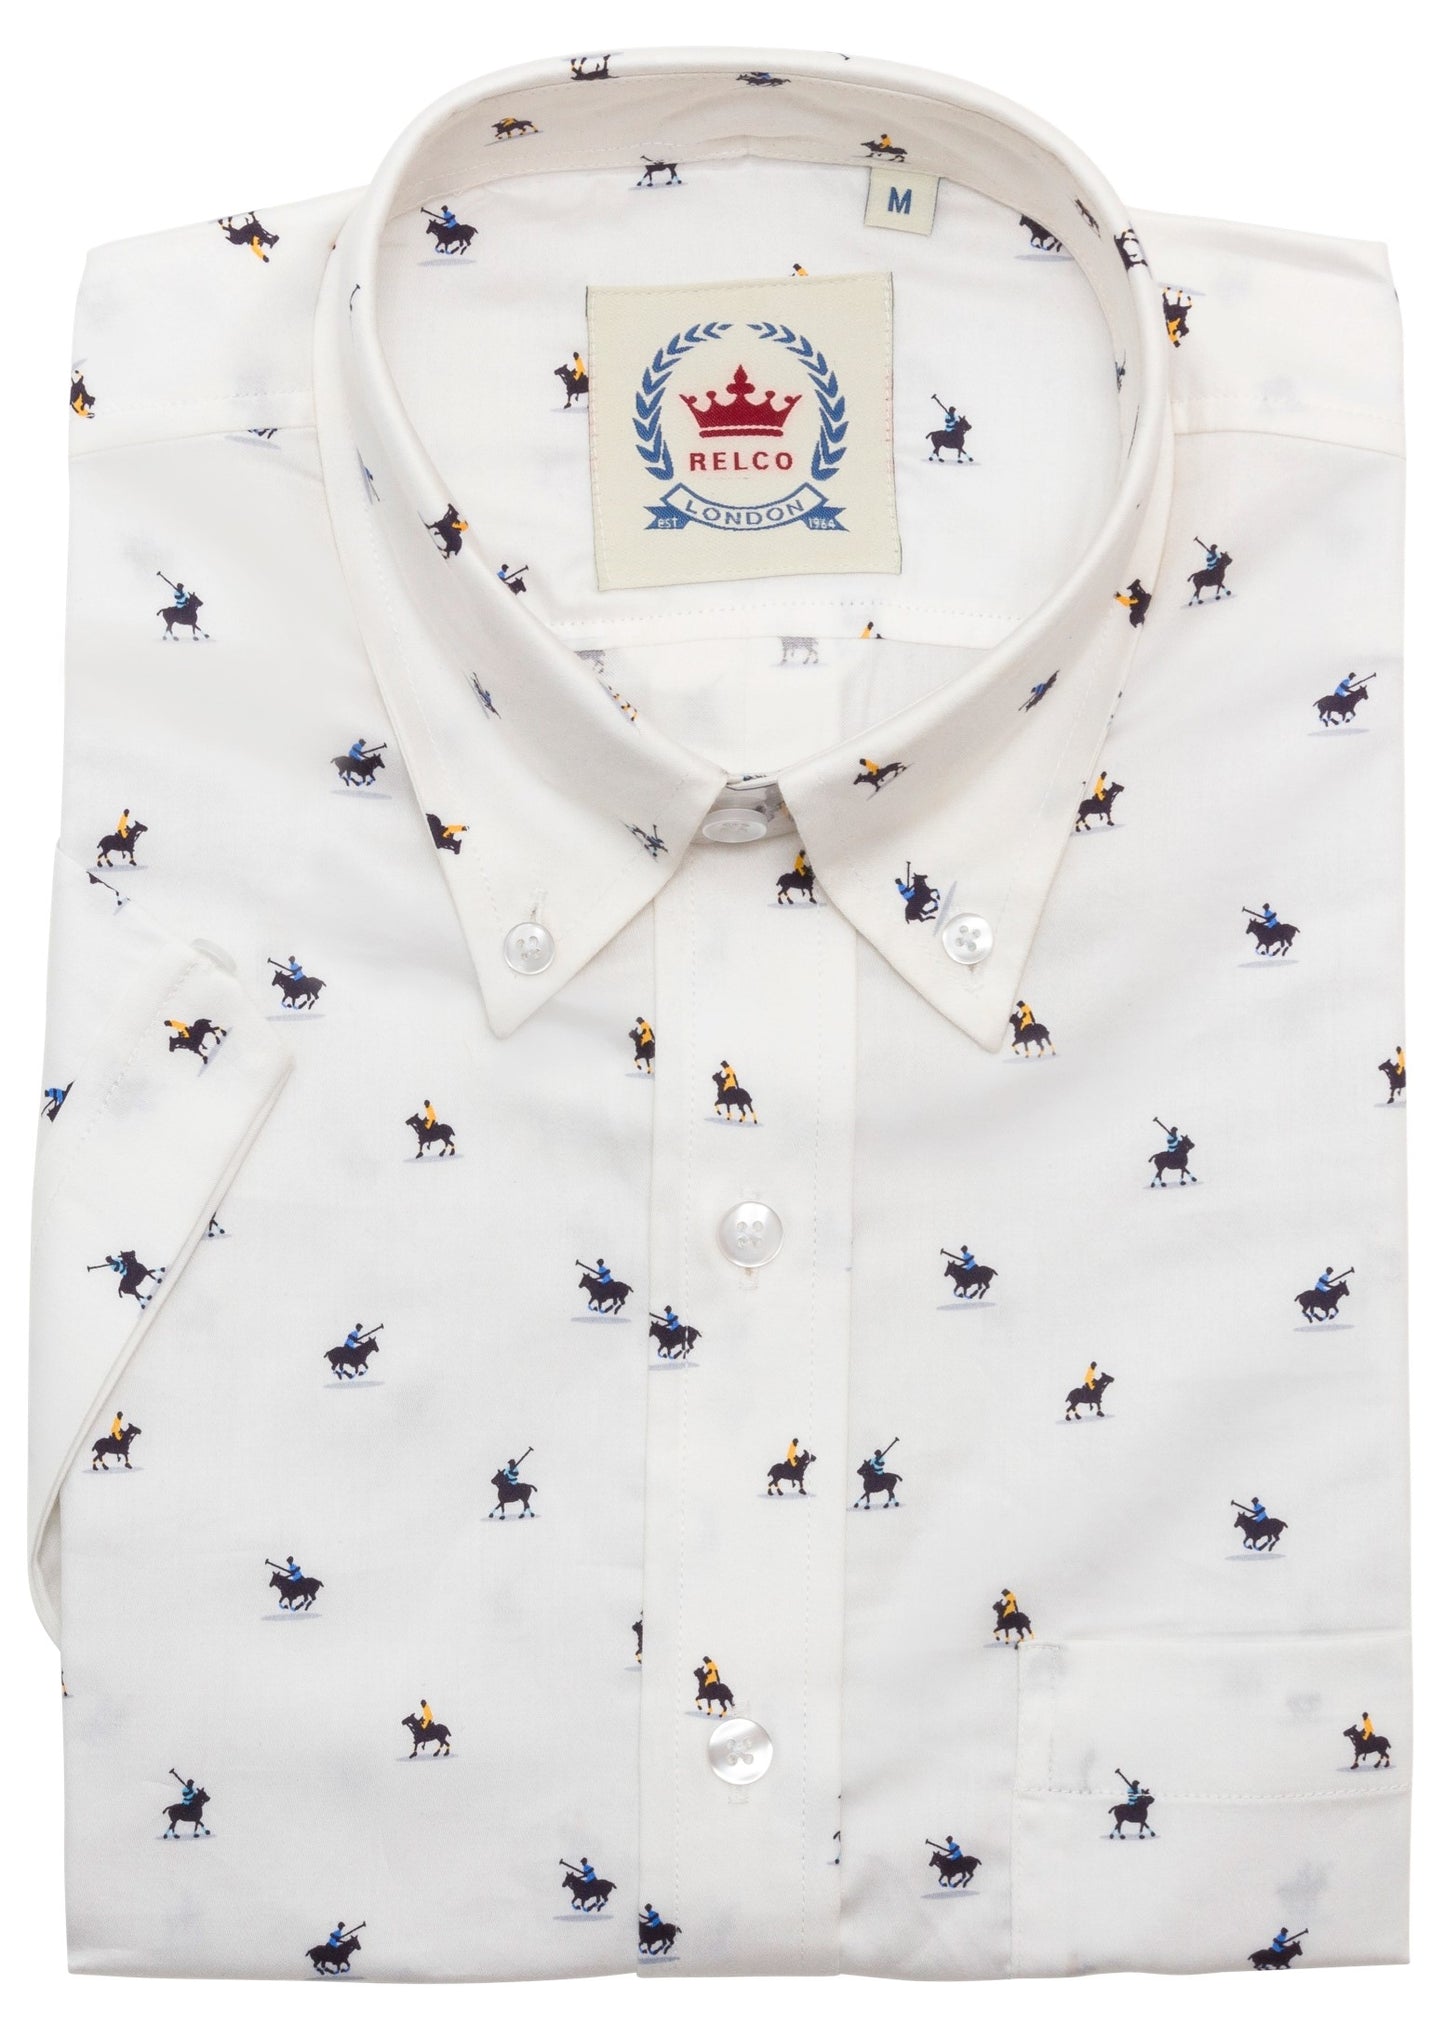 Relco White Polo Pony Print Cotton Short Sleeved  Button Down Shirt